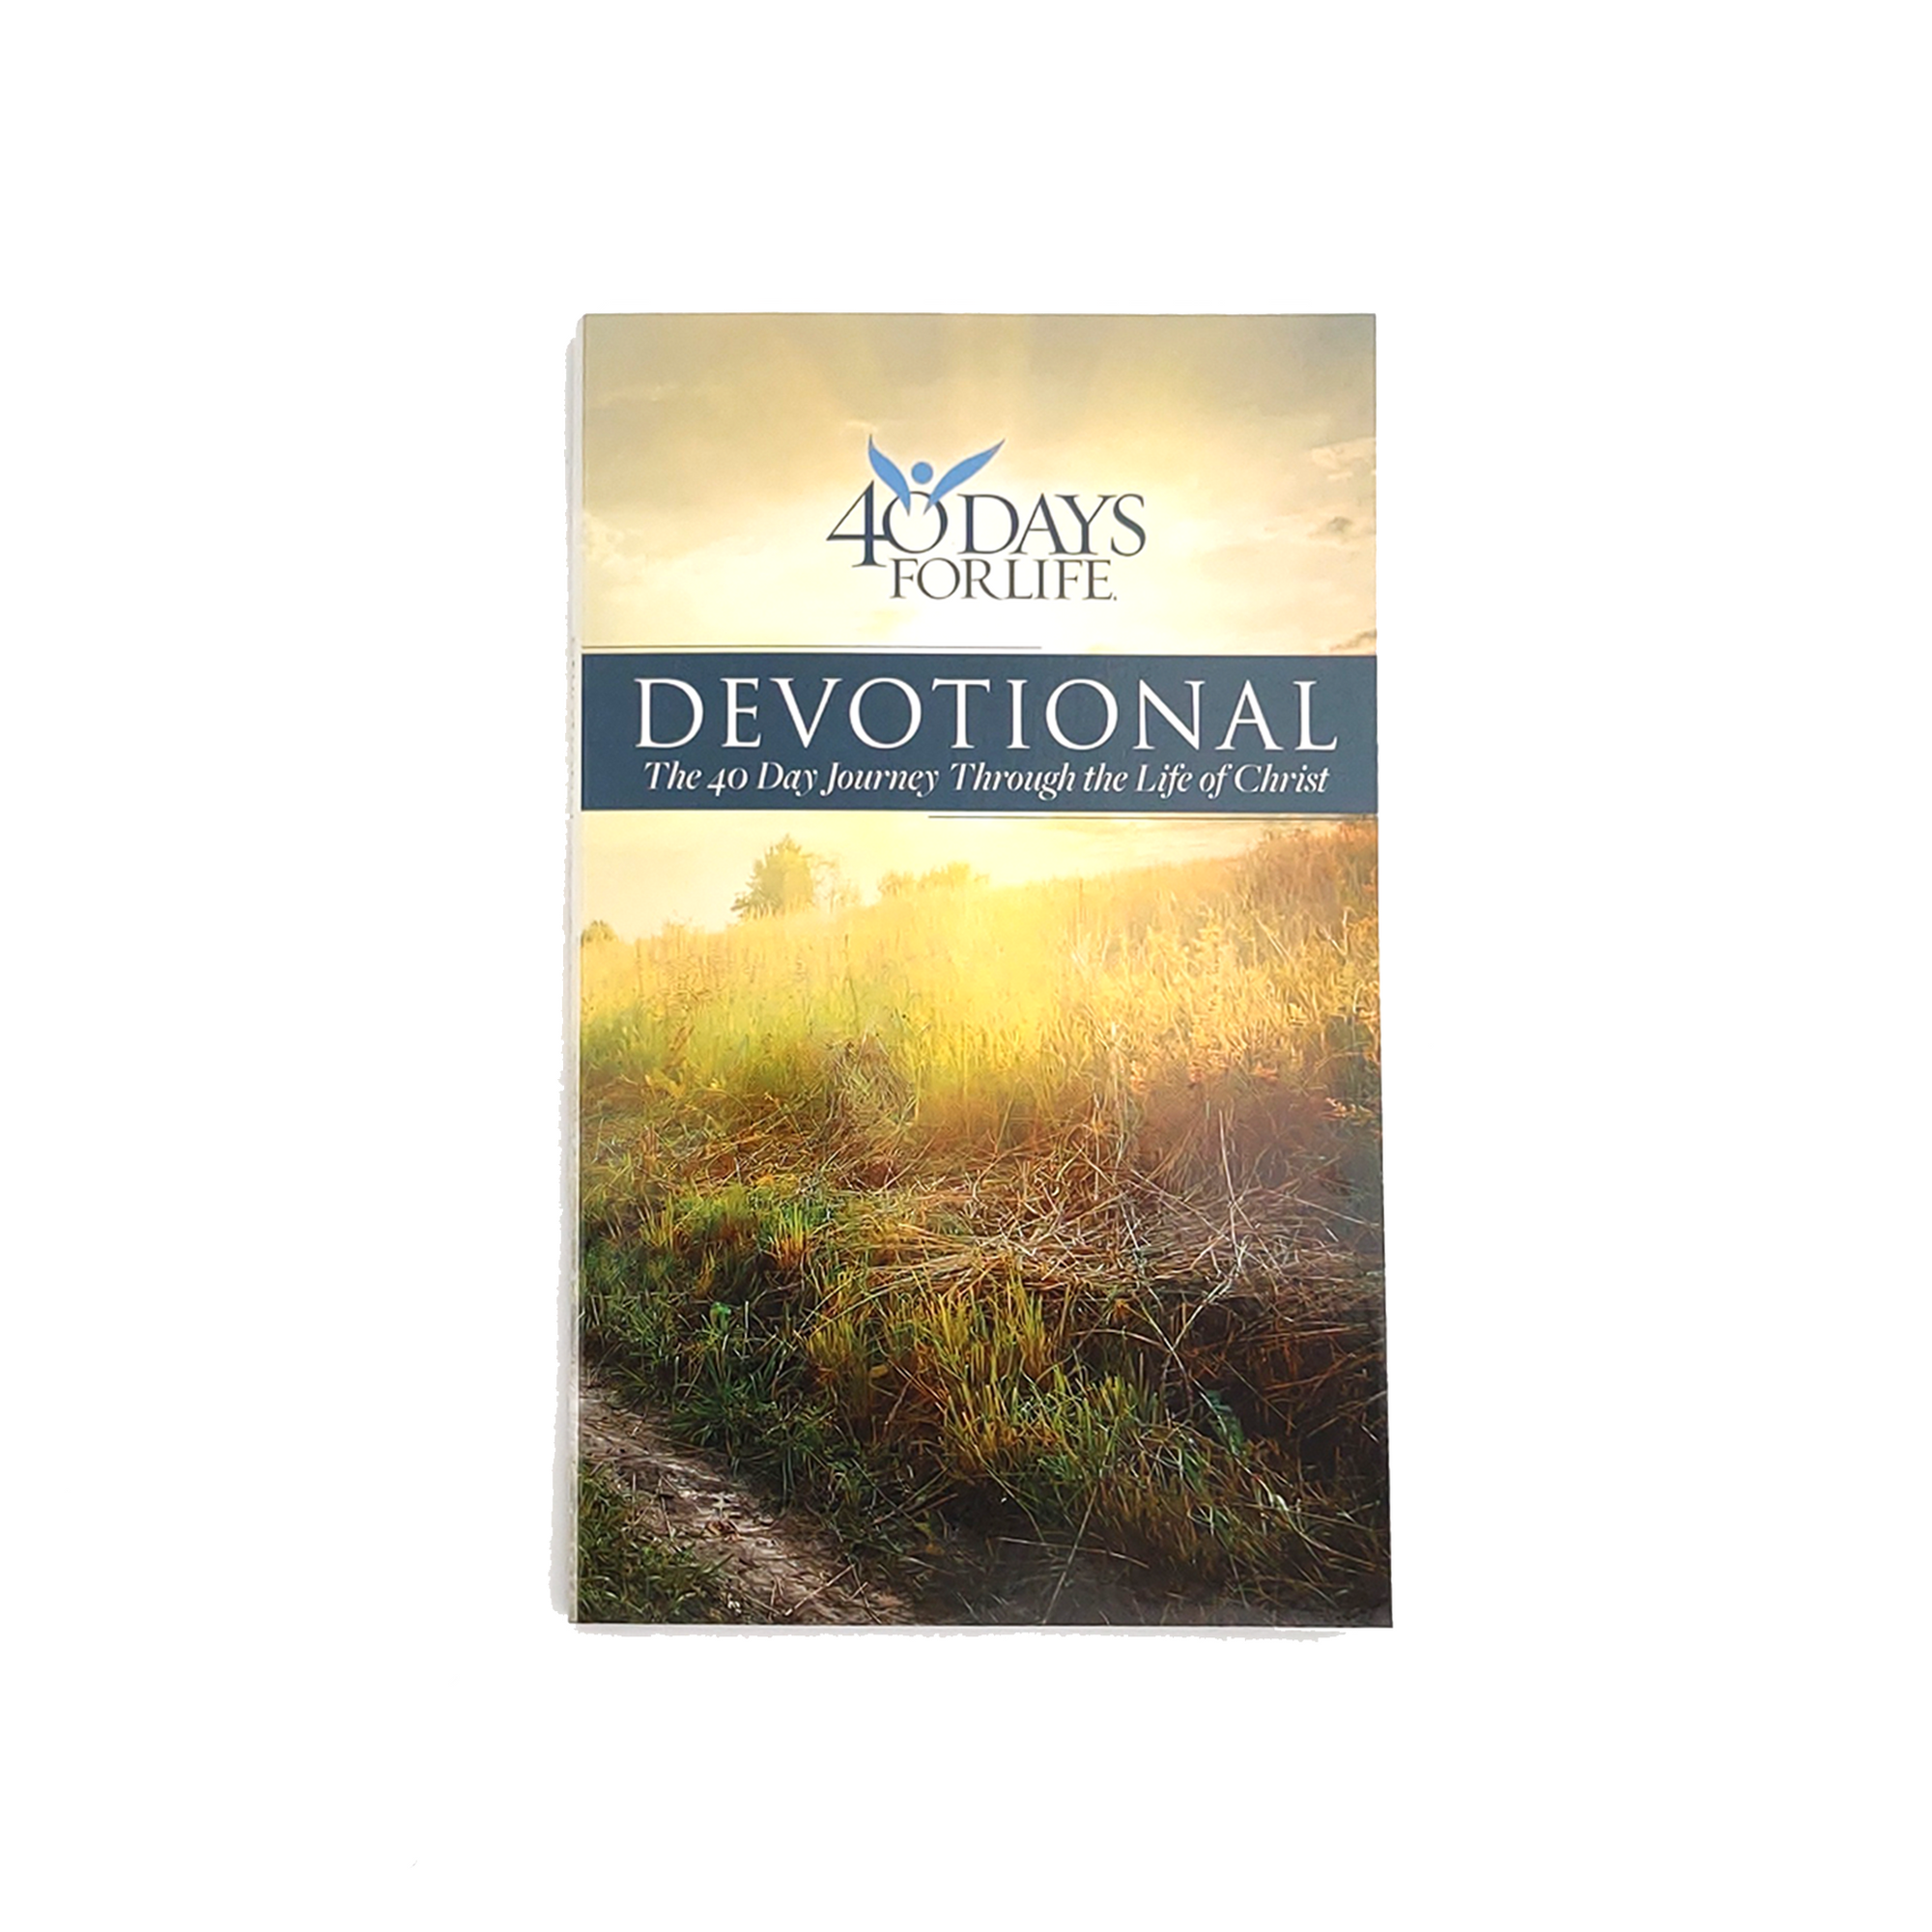 Devotional: The 40 Day Journey Through the Life of Christ